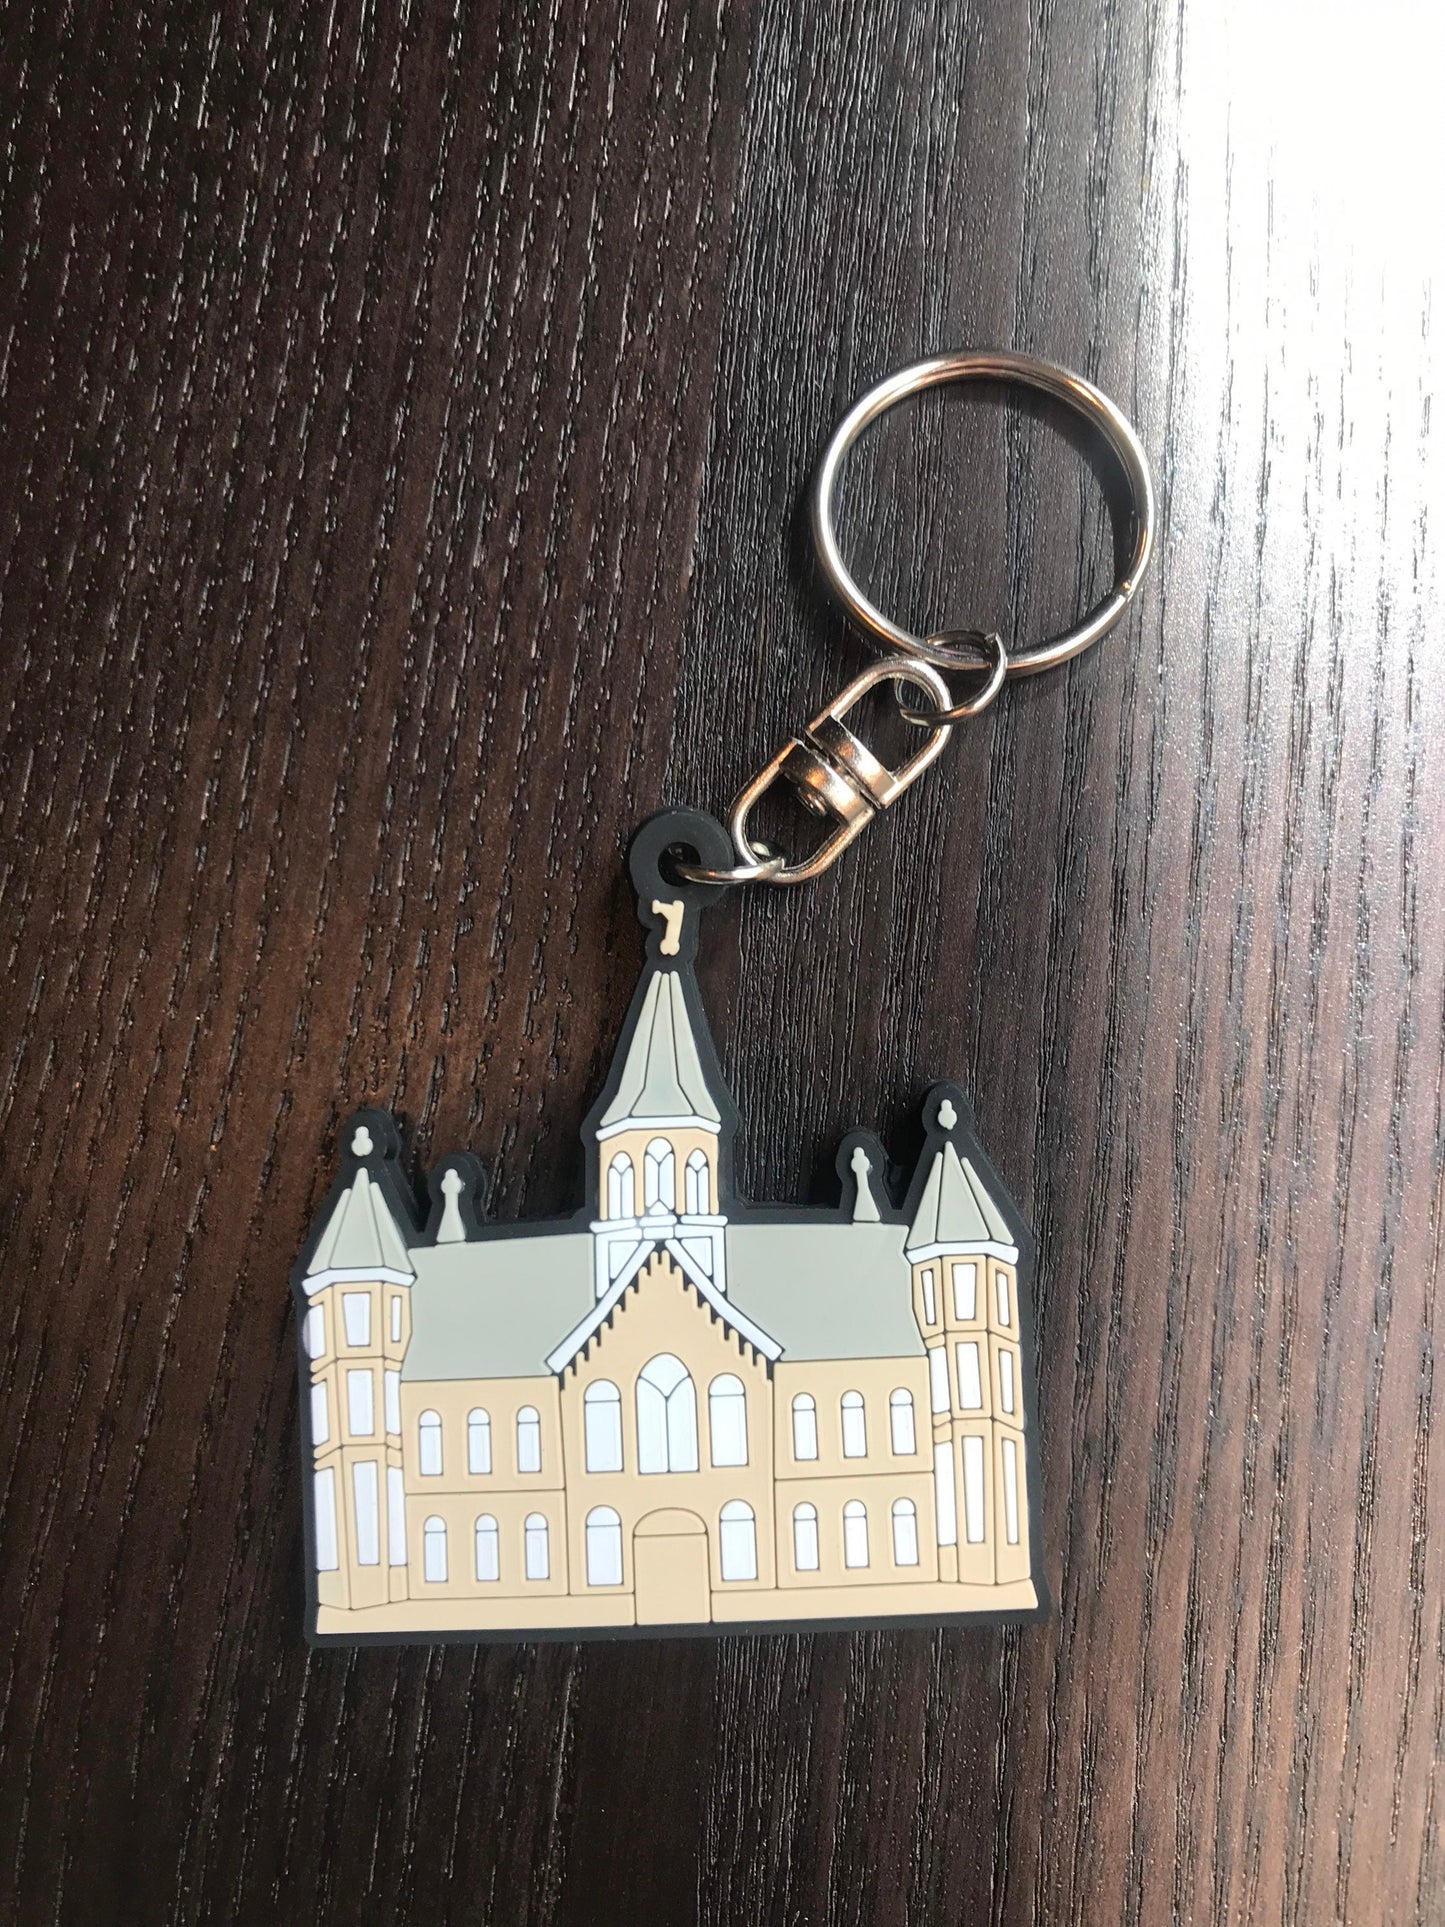 Provo City Center Temple Keychain, 2x2in. PVC Rubber keychain